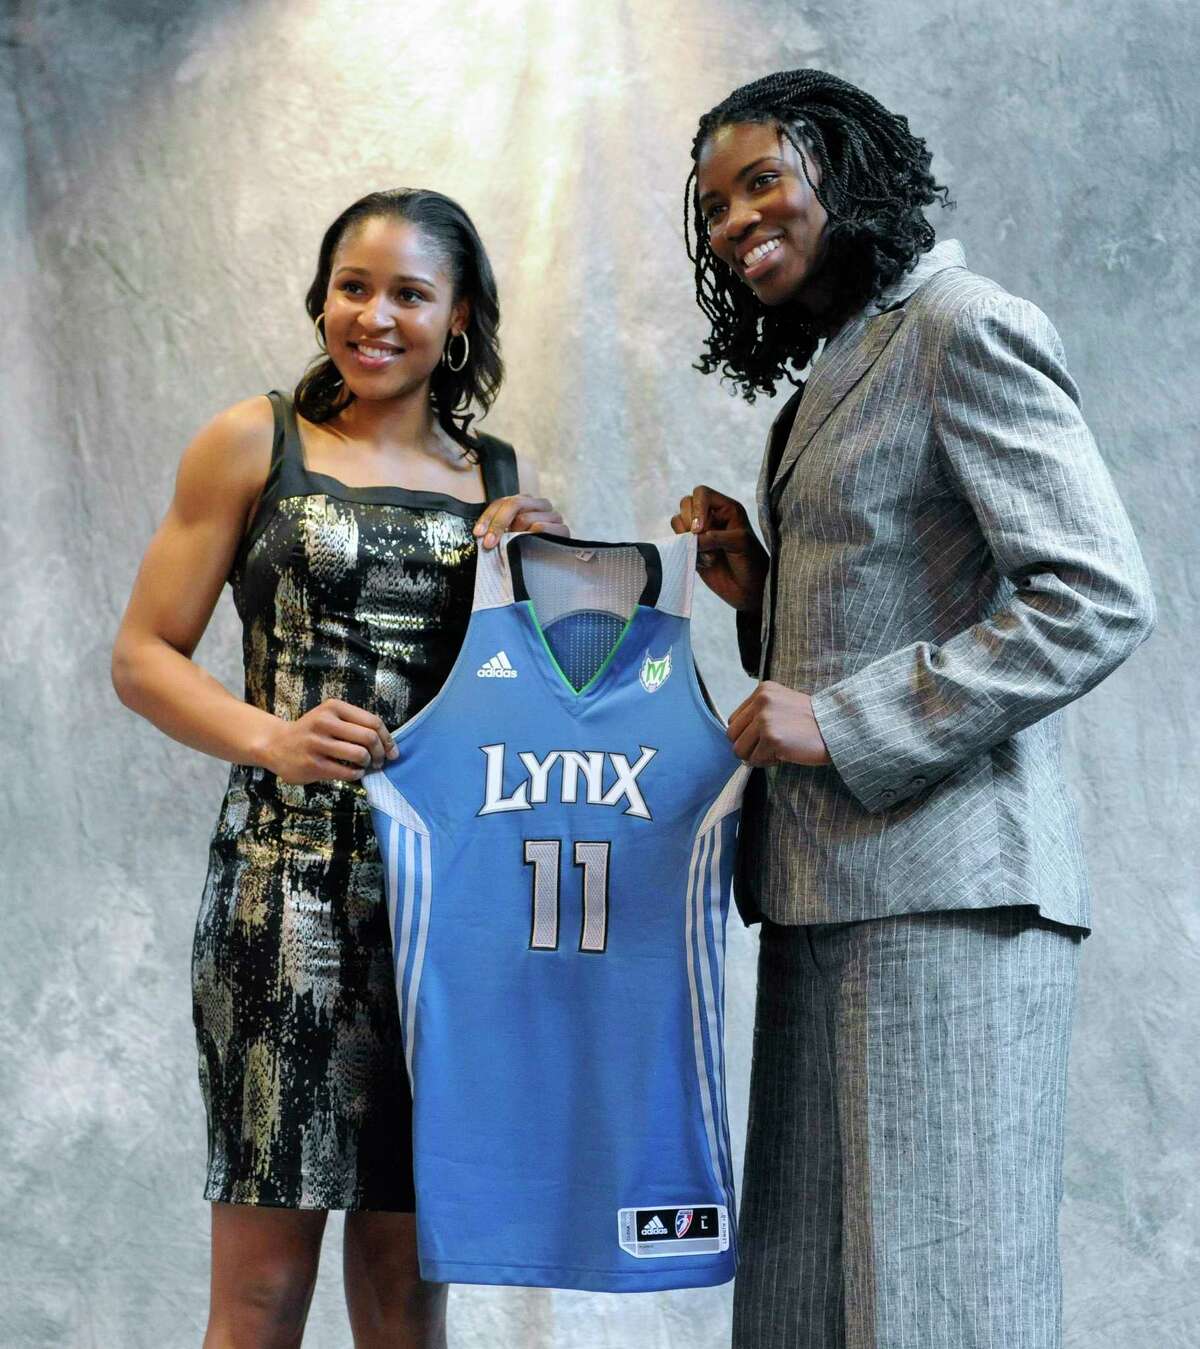 Connecticut's Maya Moore, left, and Xavier's Amber Harris, right, hold up a Minnesota Lynx jersey after being picked by the team in the WNBA basketball draft in Bristol, Conn., Monday, April 11, 2011. (AP Photo/Jessica Hill)